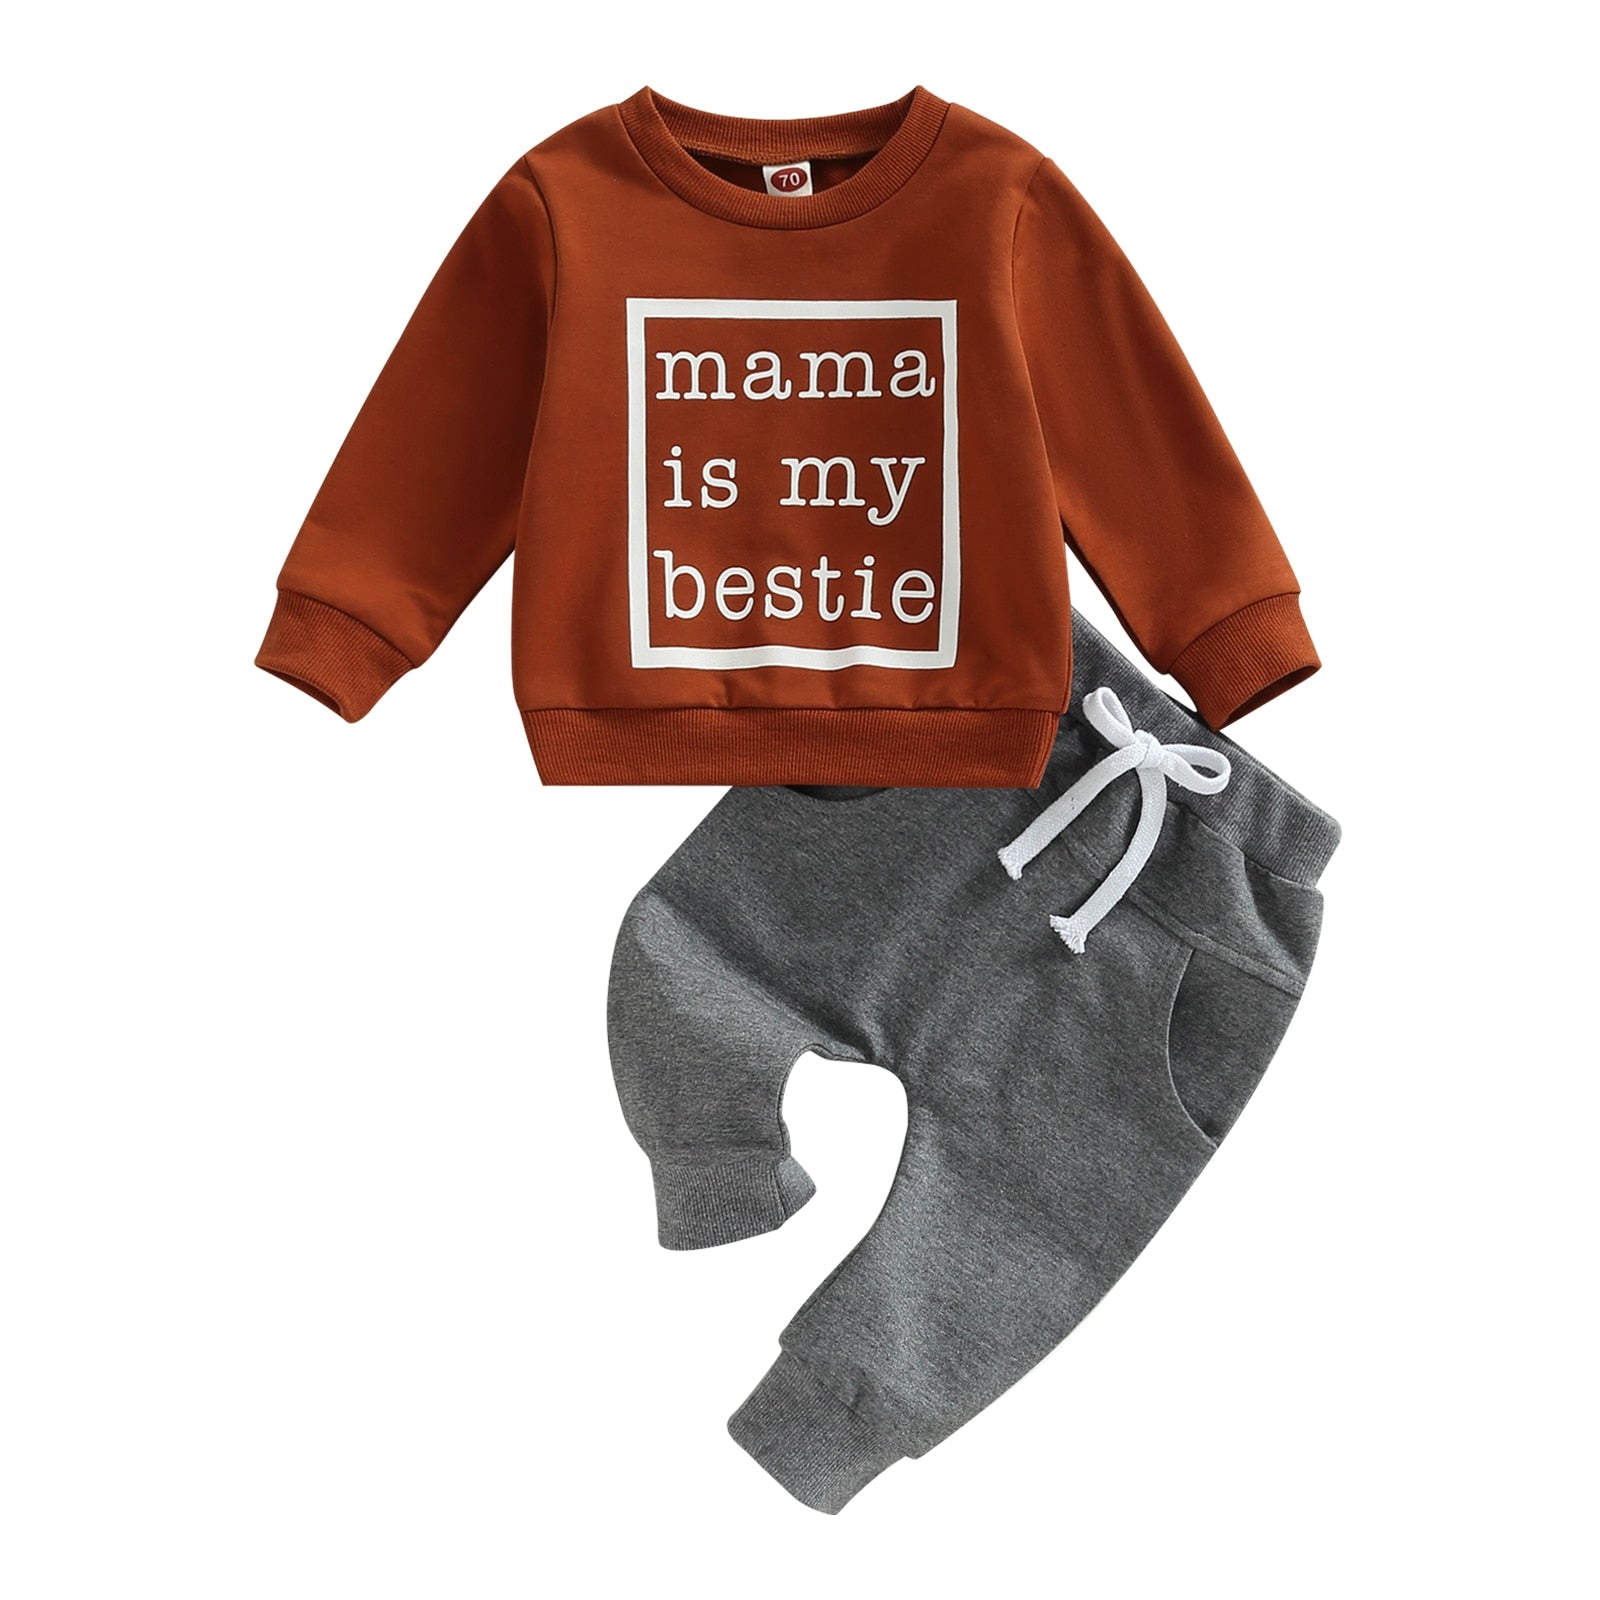 Dress Your Little Ones in Style with Spring Baby Clothes Sets